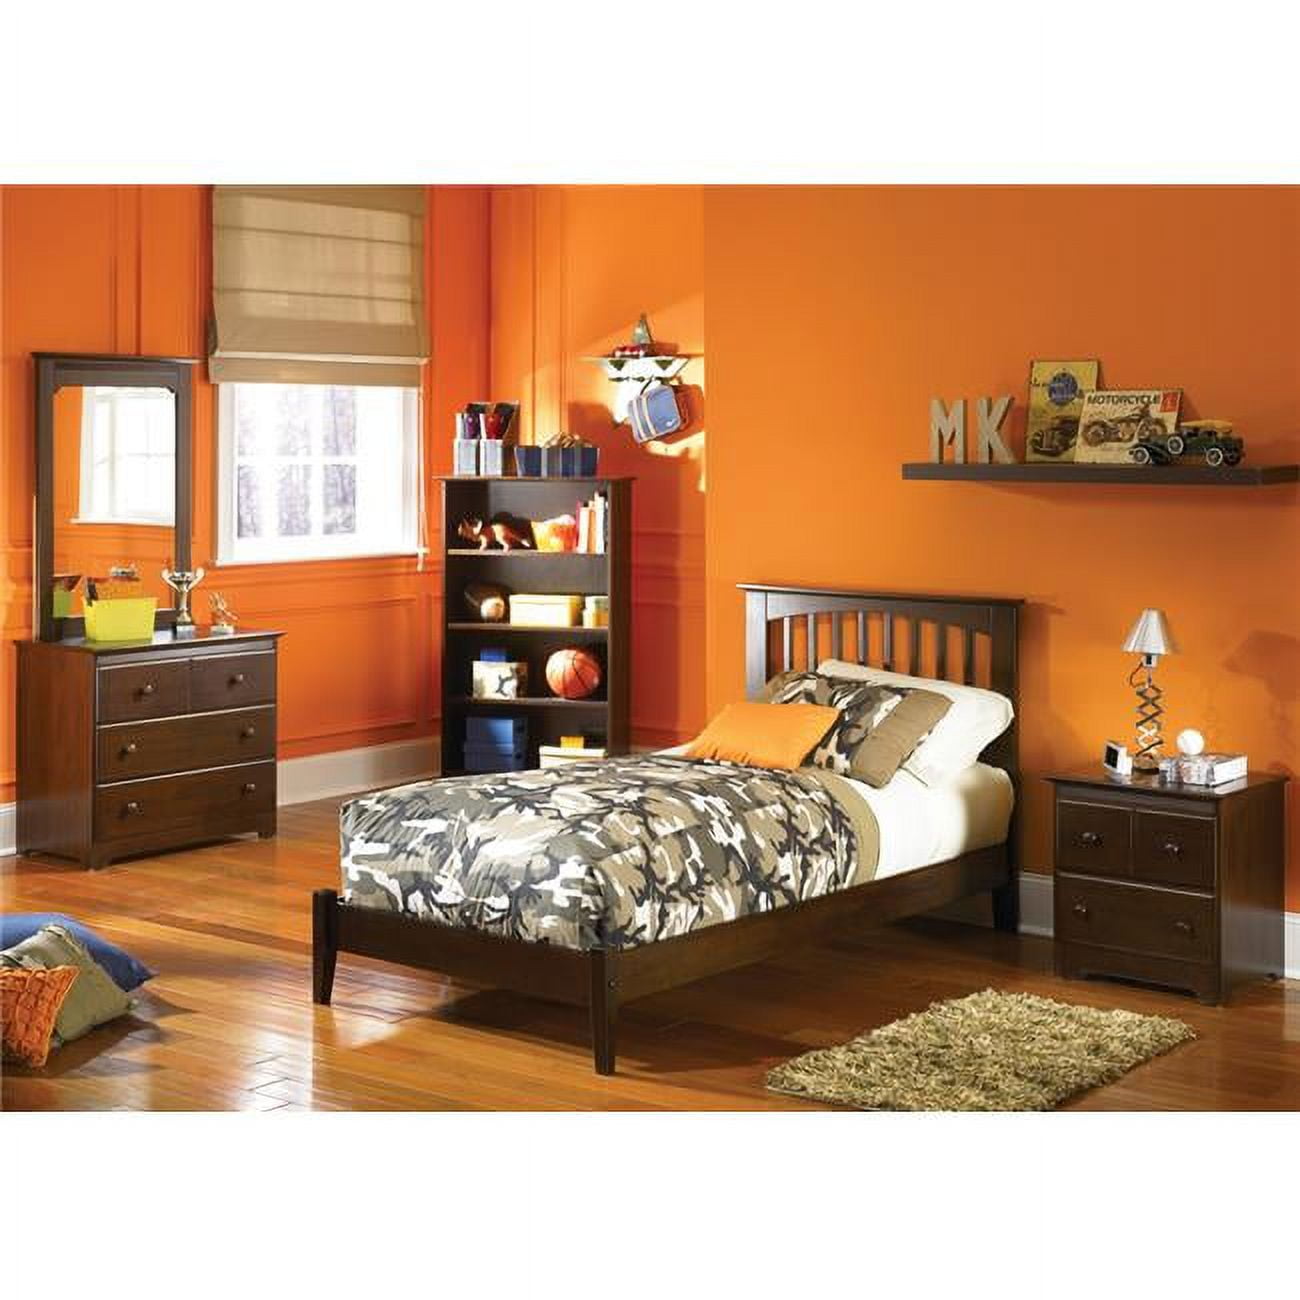 Picture of Atlantic Furniture AP9021004 Brooklyn Open Foot Bed - Antique Walnut, Twin Size